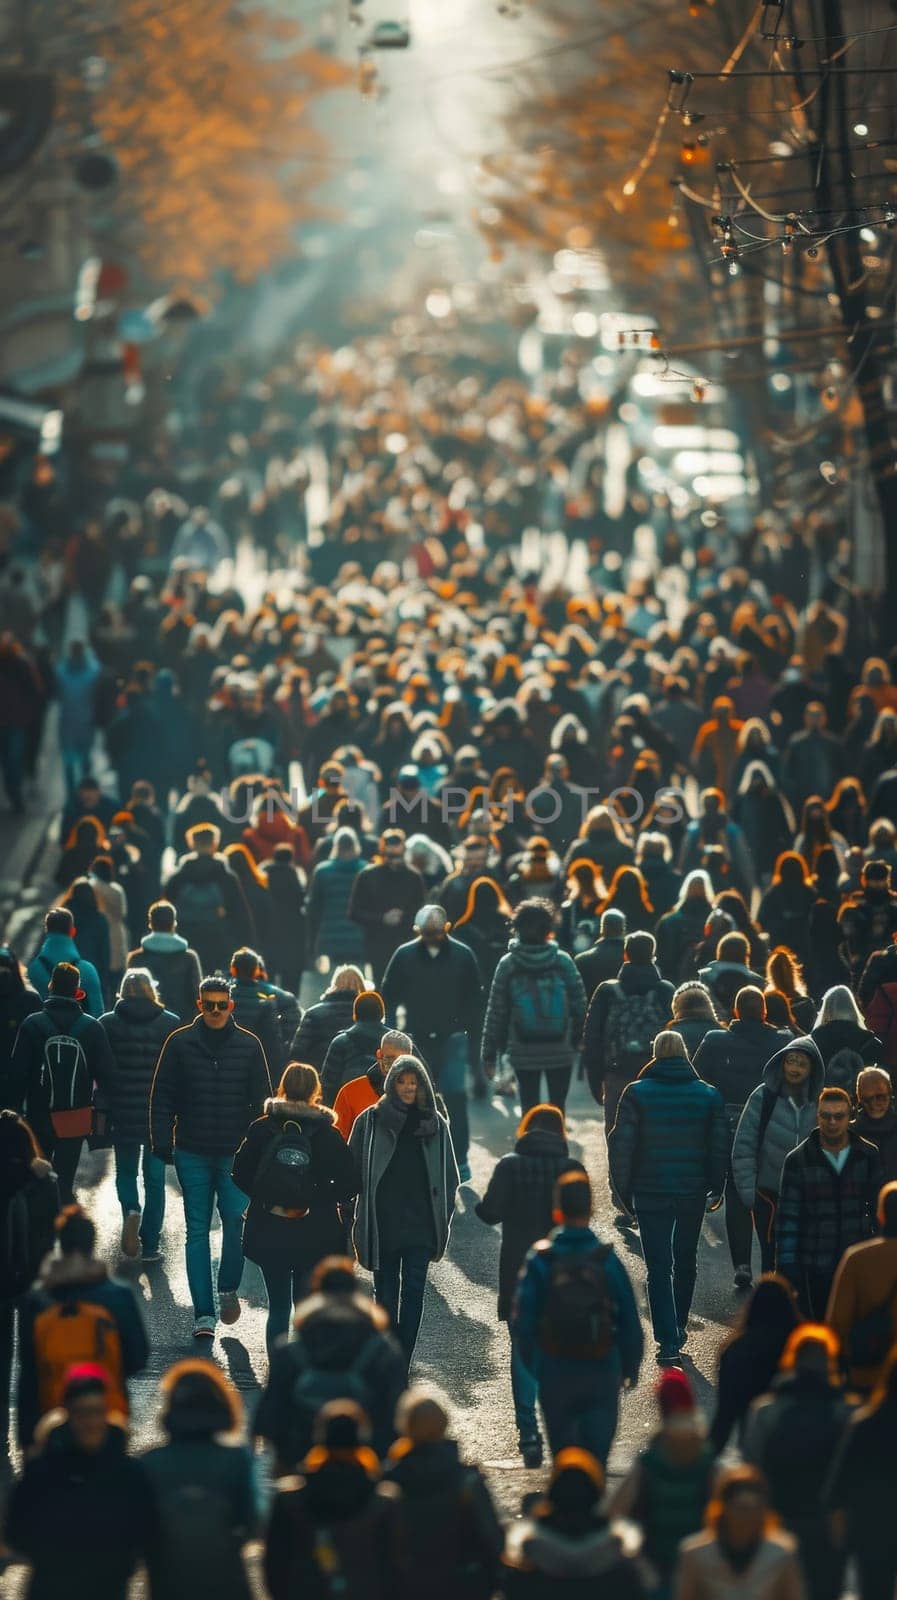 A busy street with a large crowd of people walking down it. The people are wearing winter clothes and some are carrying backpacks. The scene is bustling and lively, with people of all ages